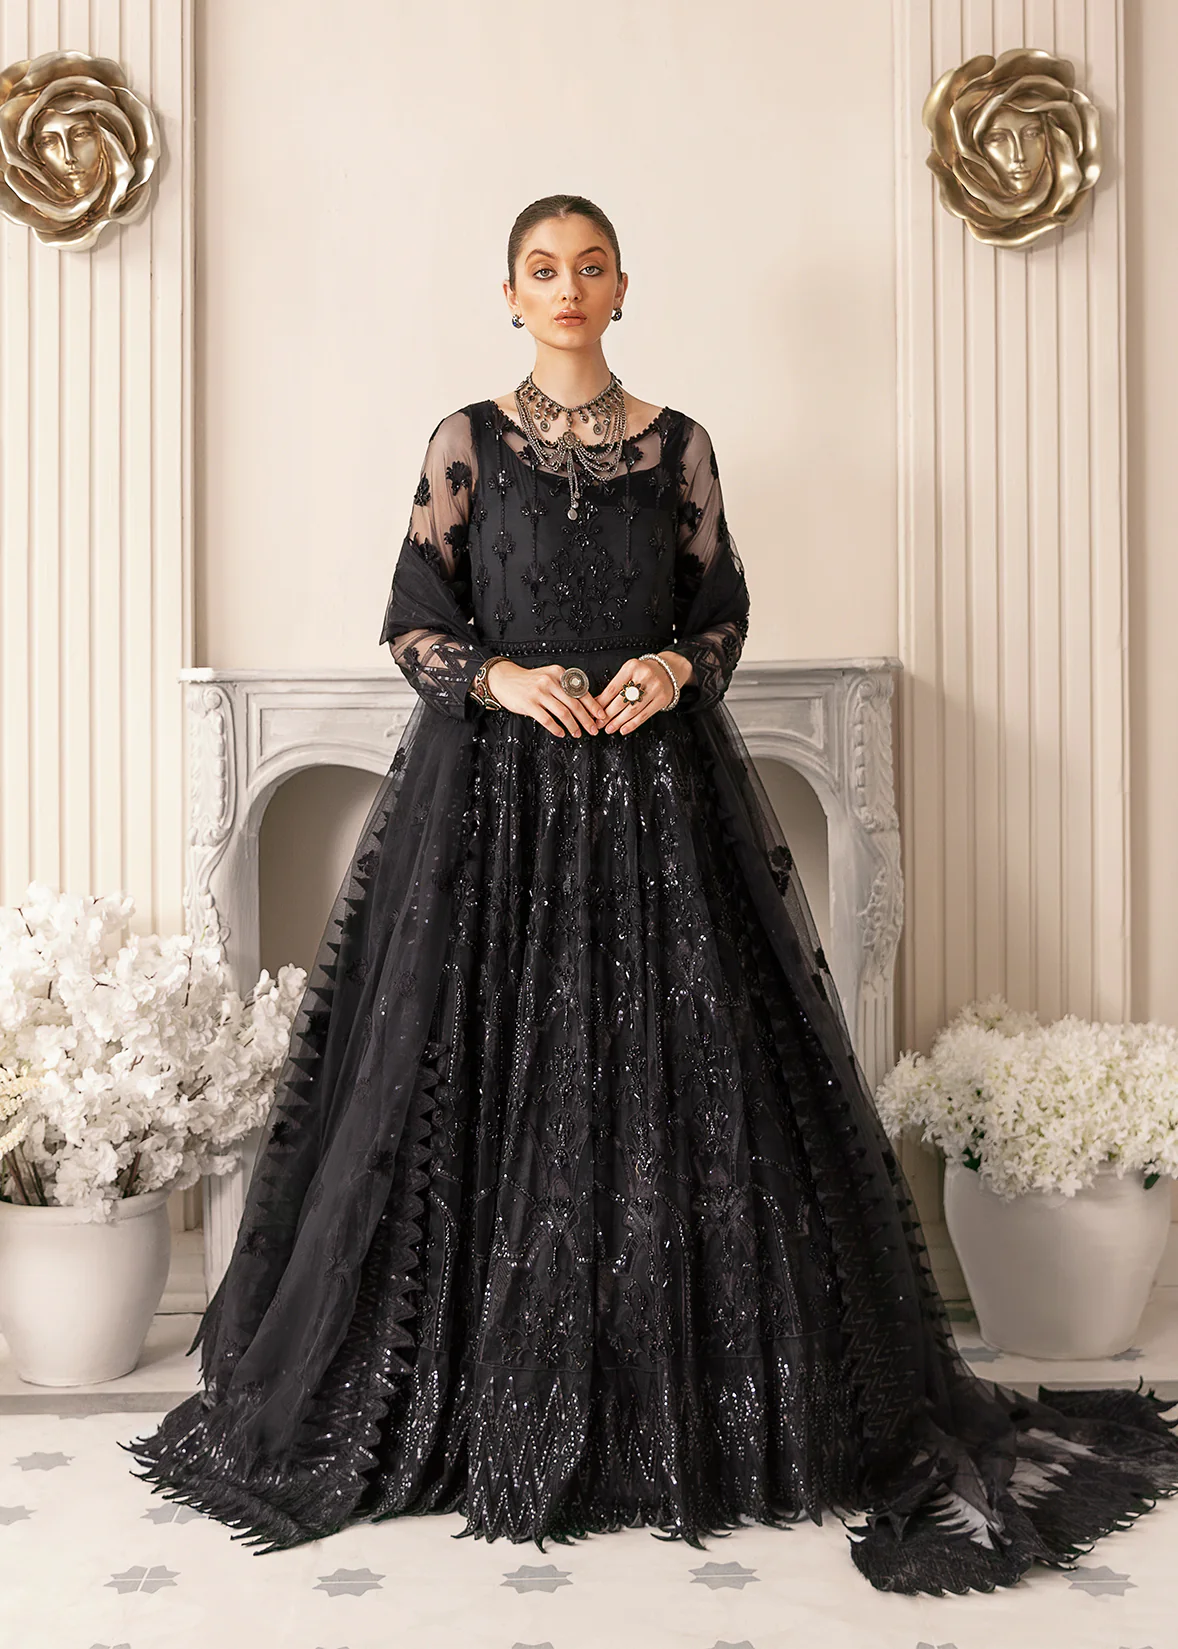 Need a fashionable gown design in plumand black colour without sleeves.